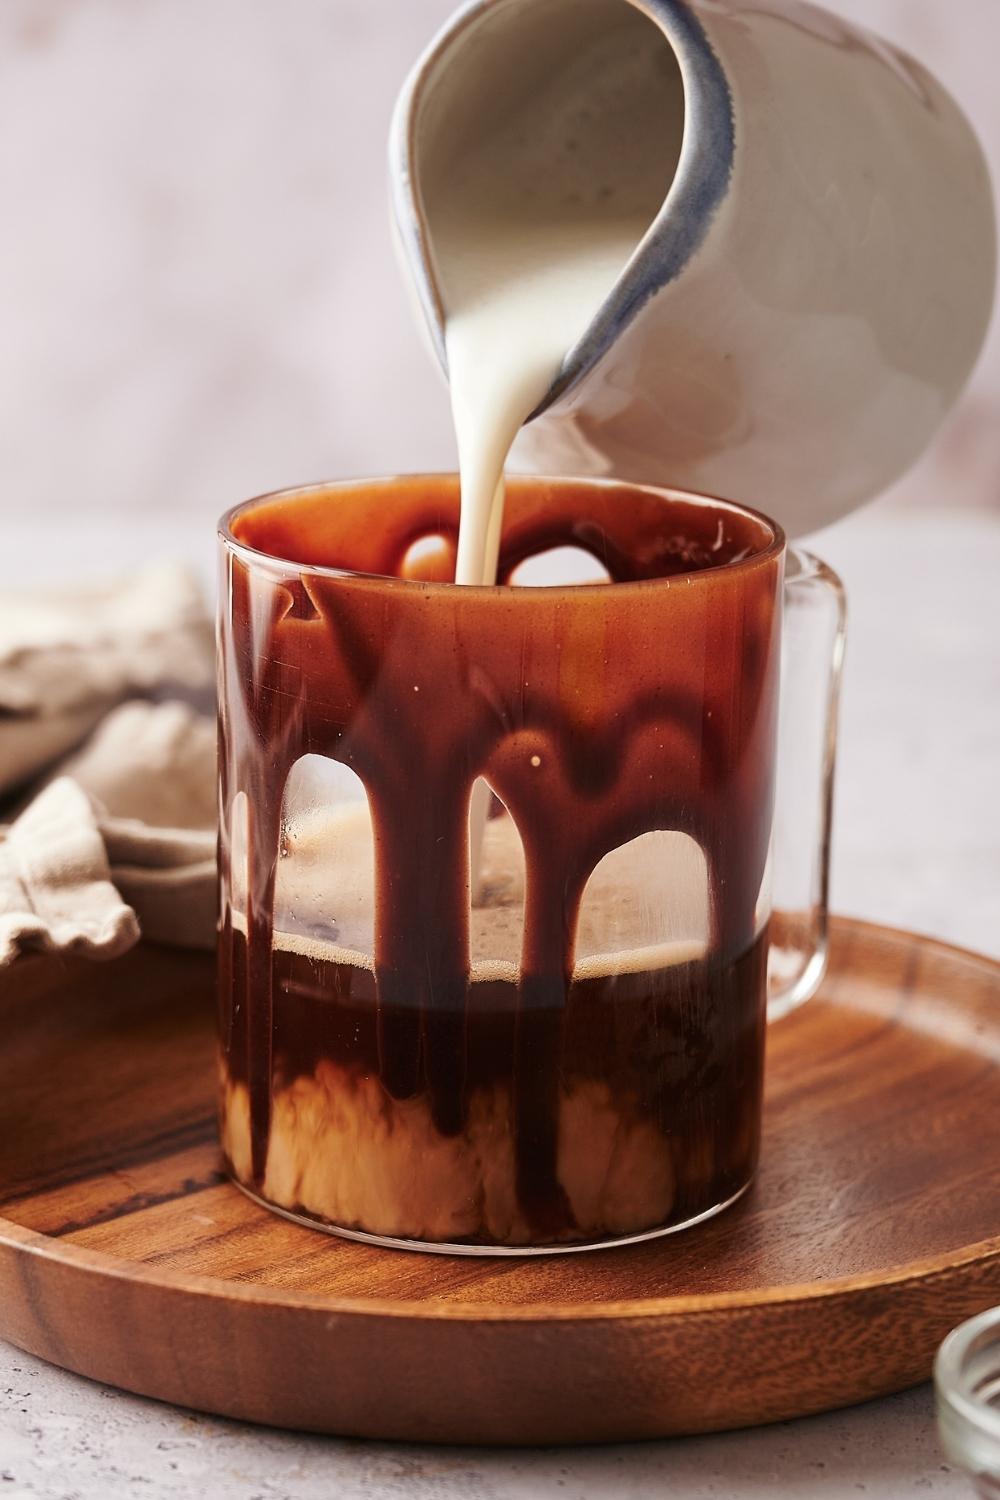 A clear glass mug with chocolate syrup drizzled on the sides. Steamed milk is being poured into the mug.